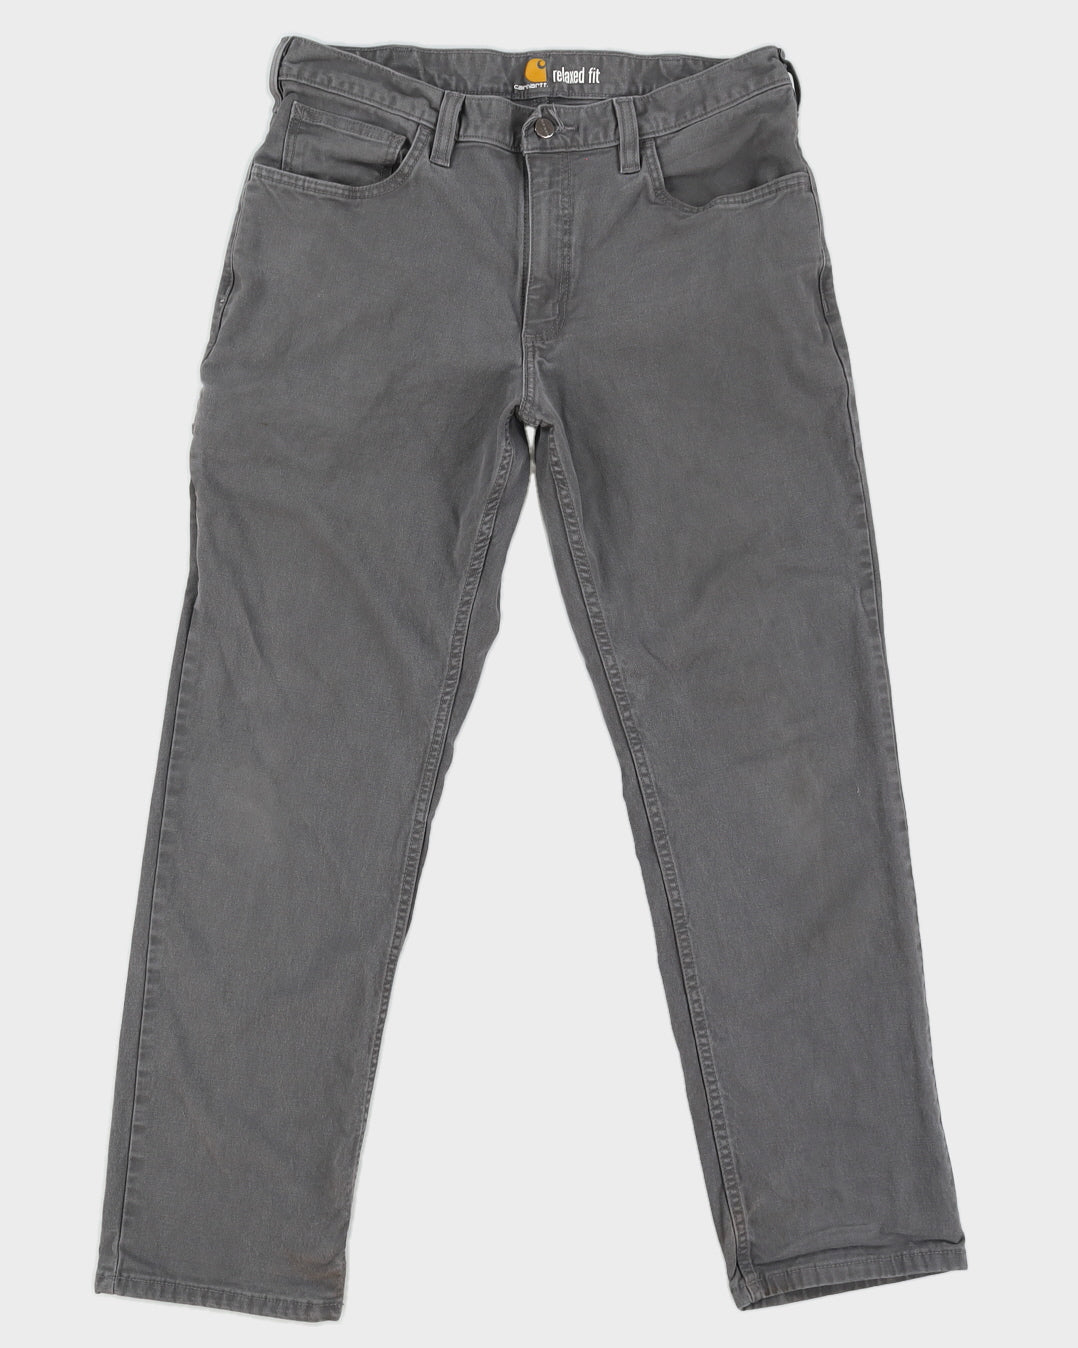 Carhartt Grey Relaxed Fit Trousers - W35 L30